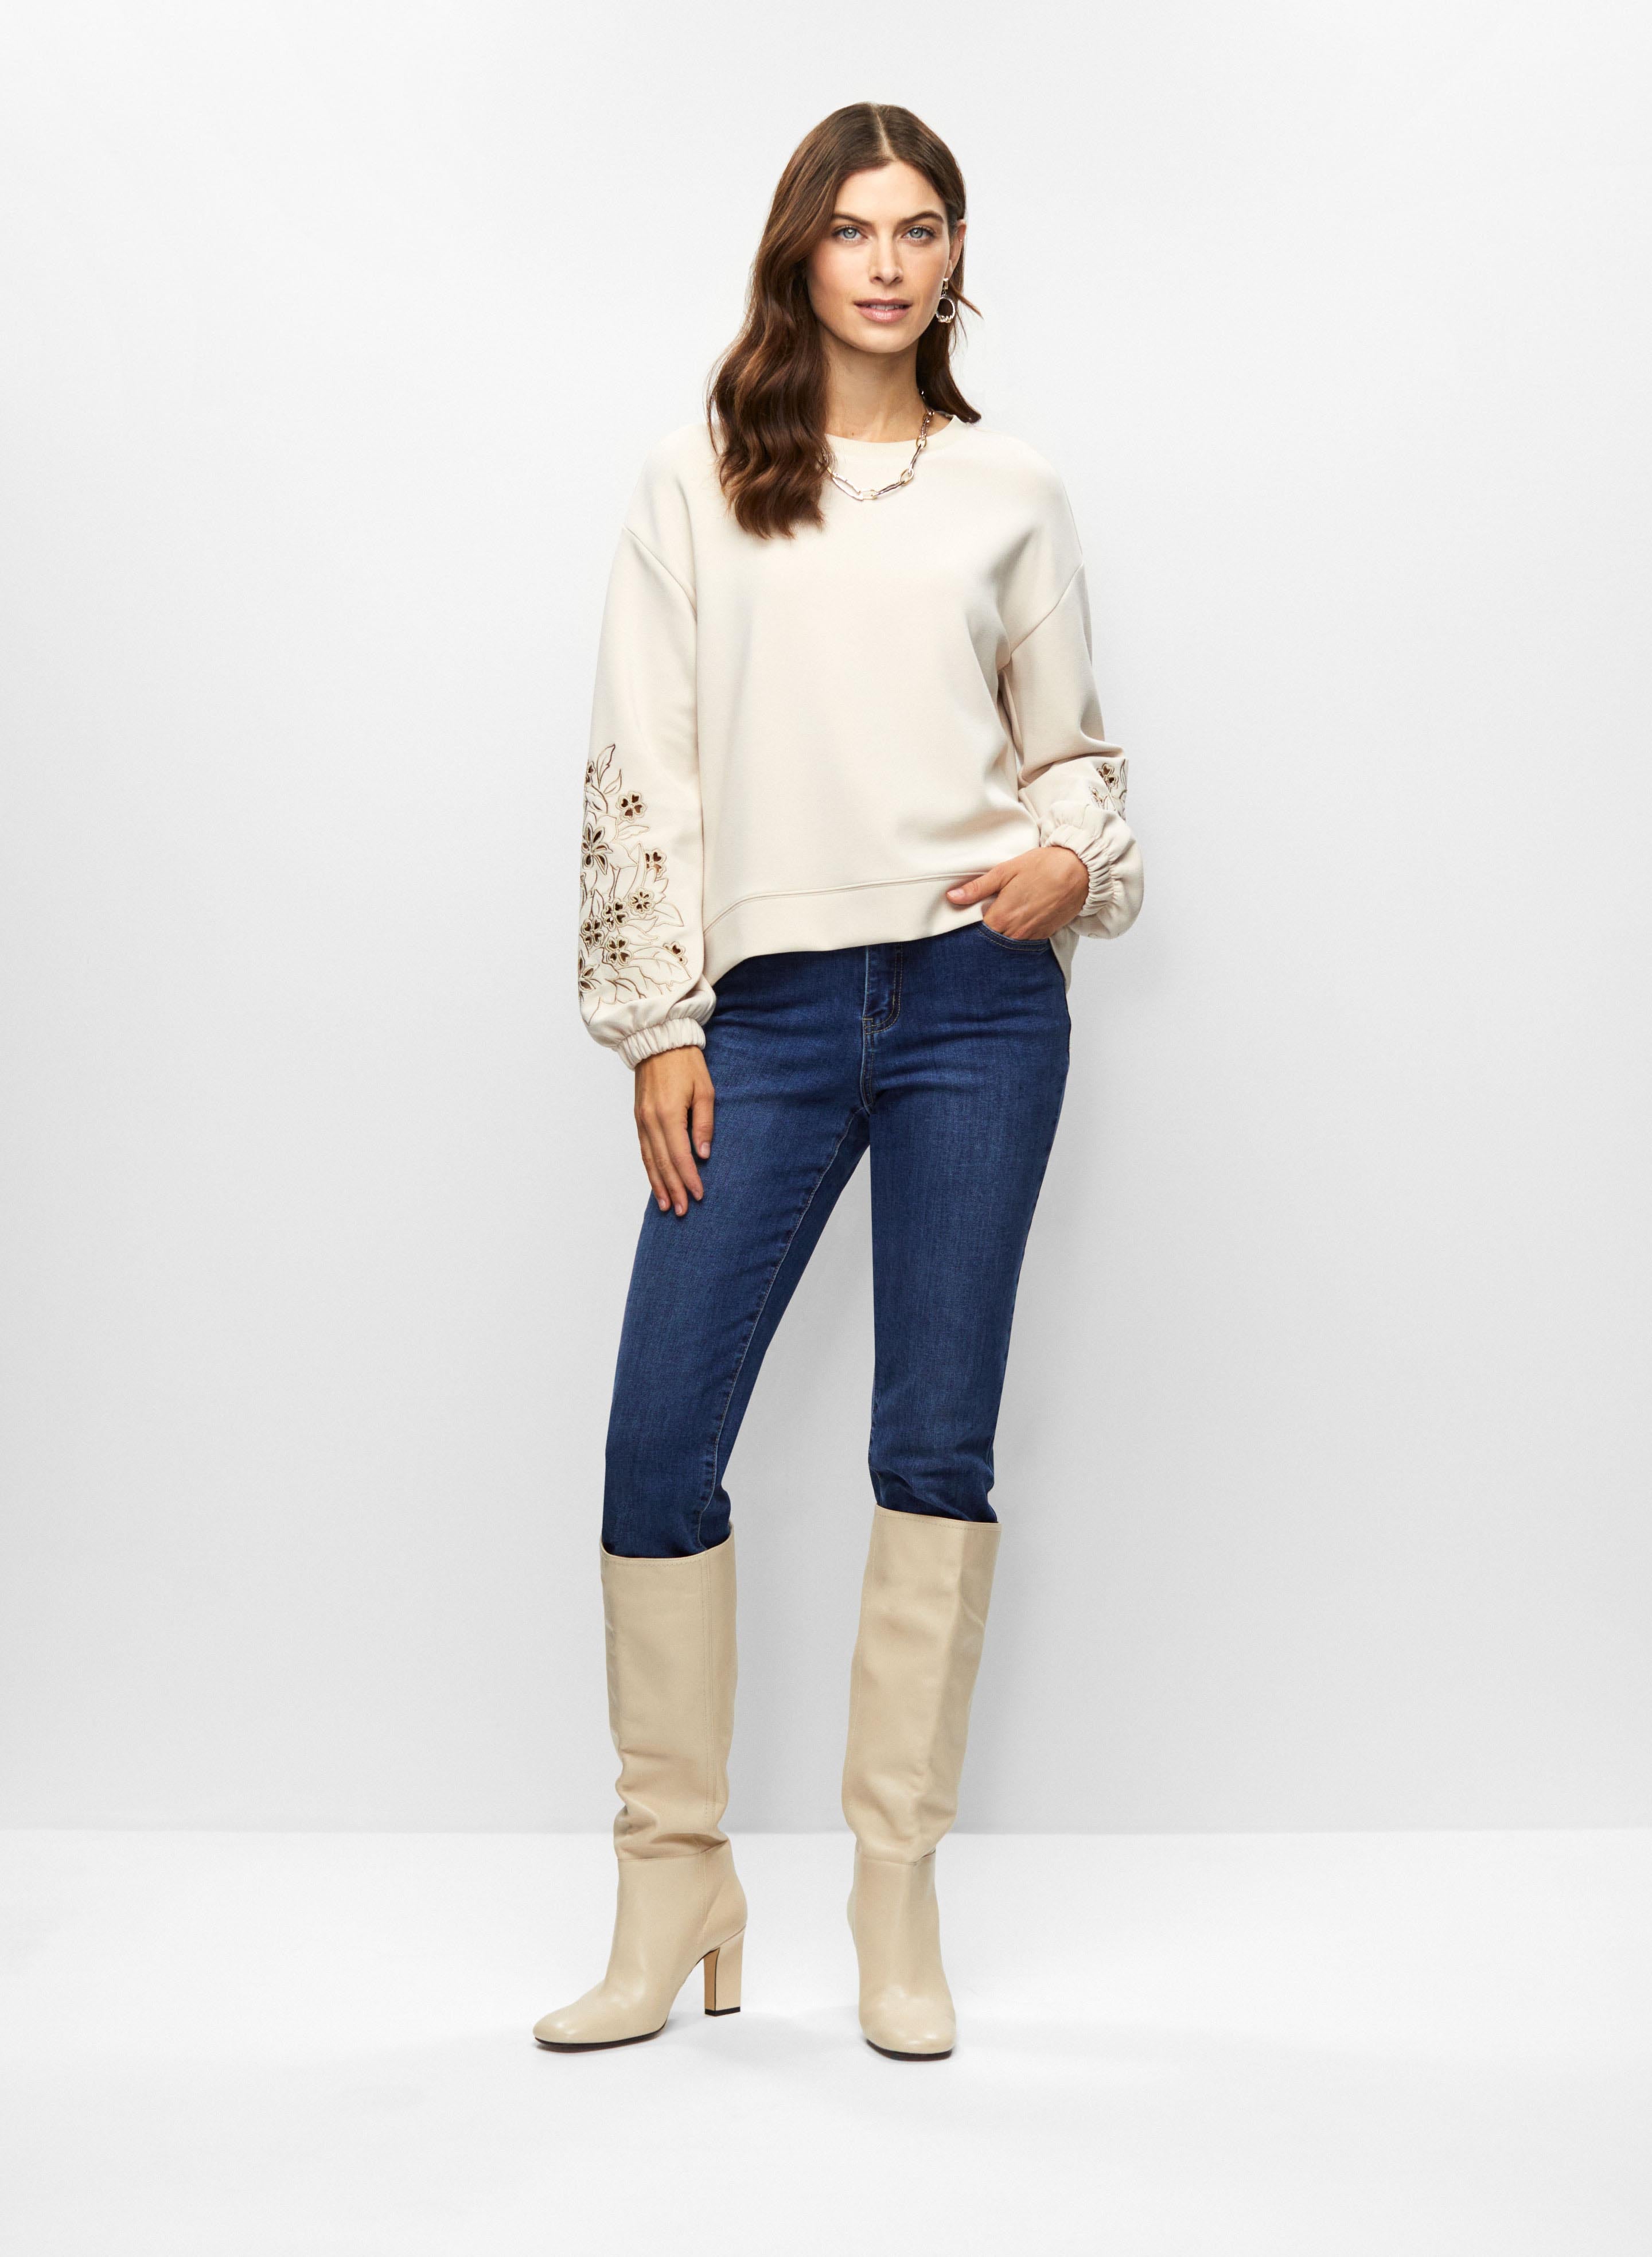 Crew Neck Sweater & Emboidered Jeans